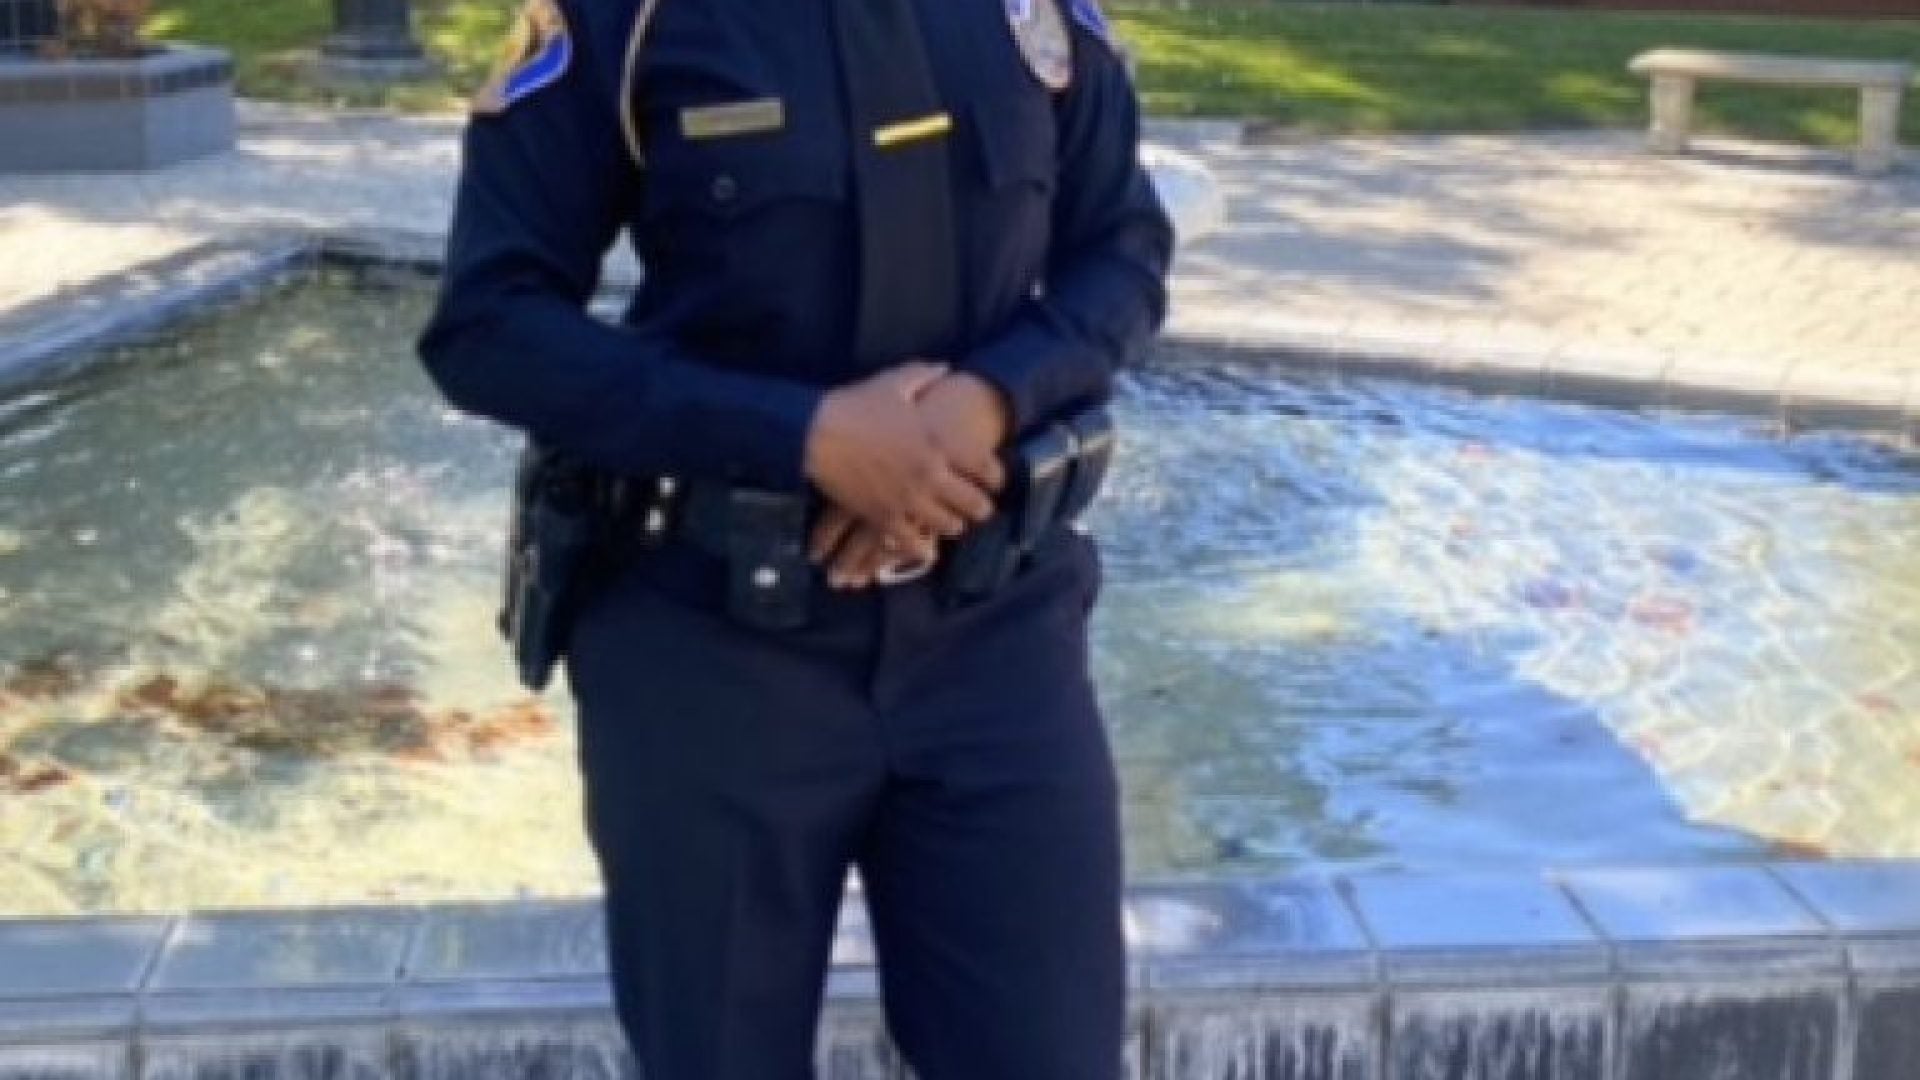 Black Female Officer Says She Was Fired After Trying To De-Escalate A Police Encounter In California. Now She's Suing The Police Department For Discrimination